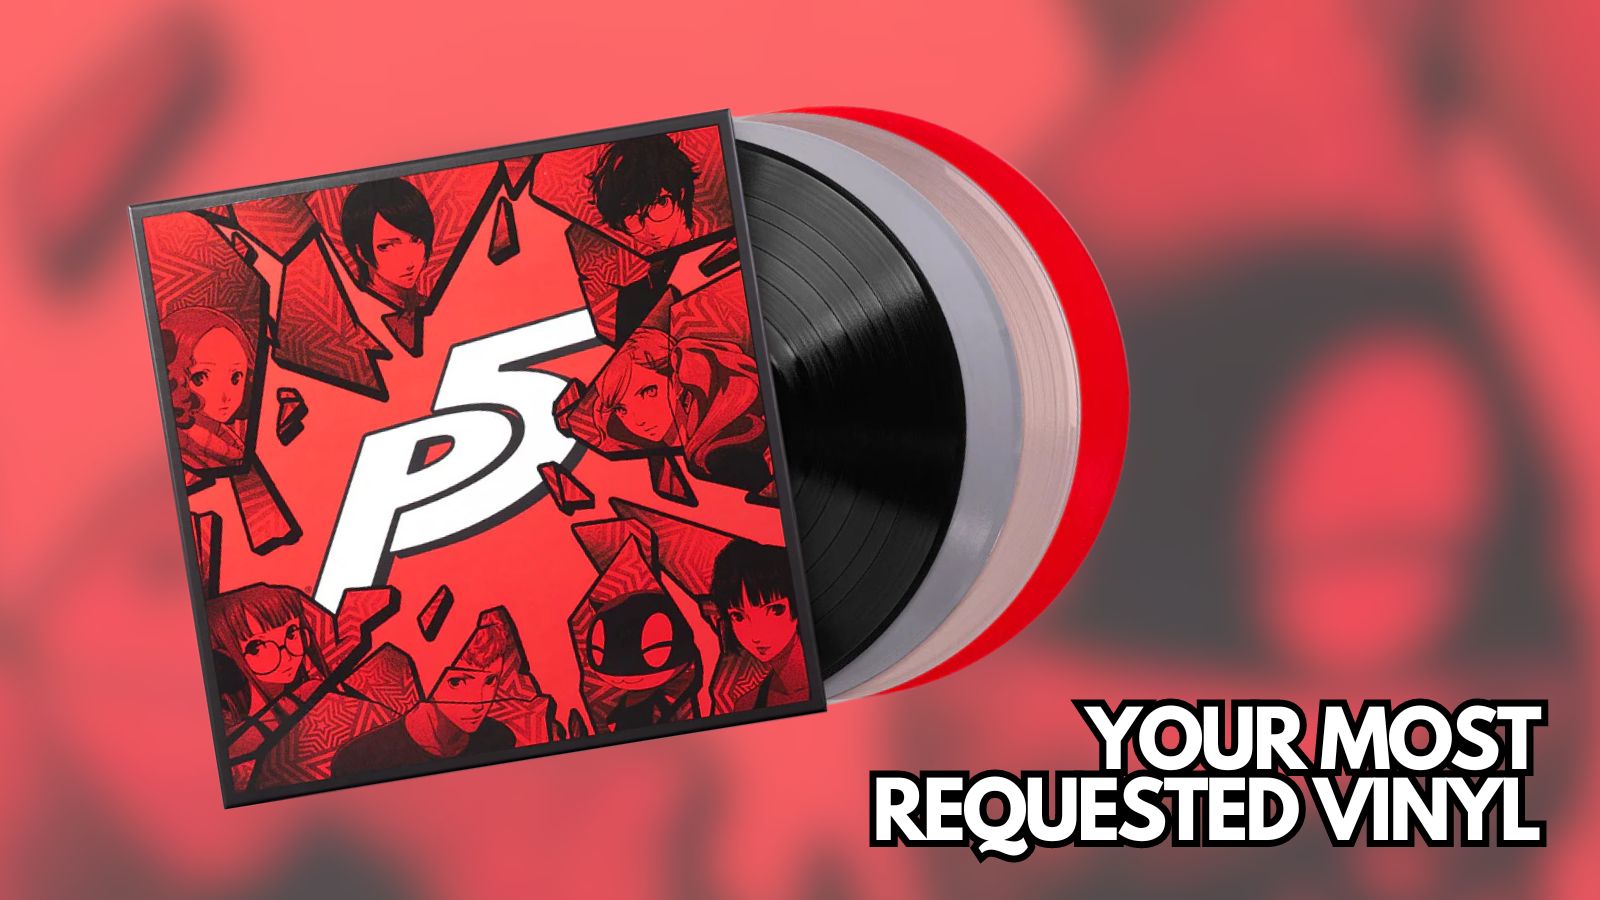 Your most requested vinyl